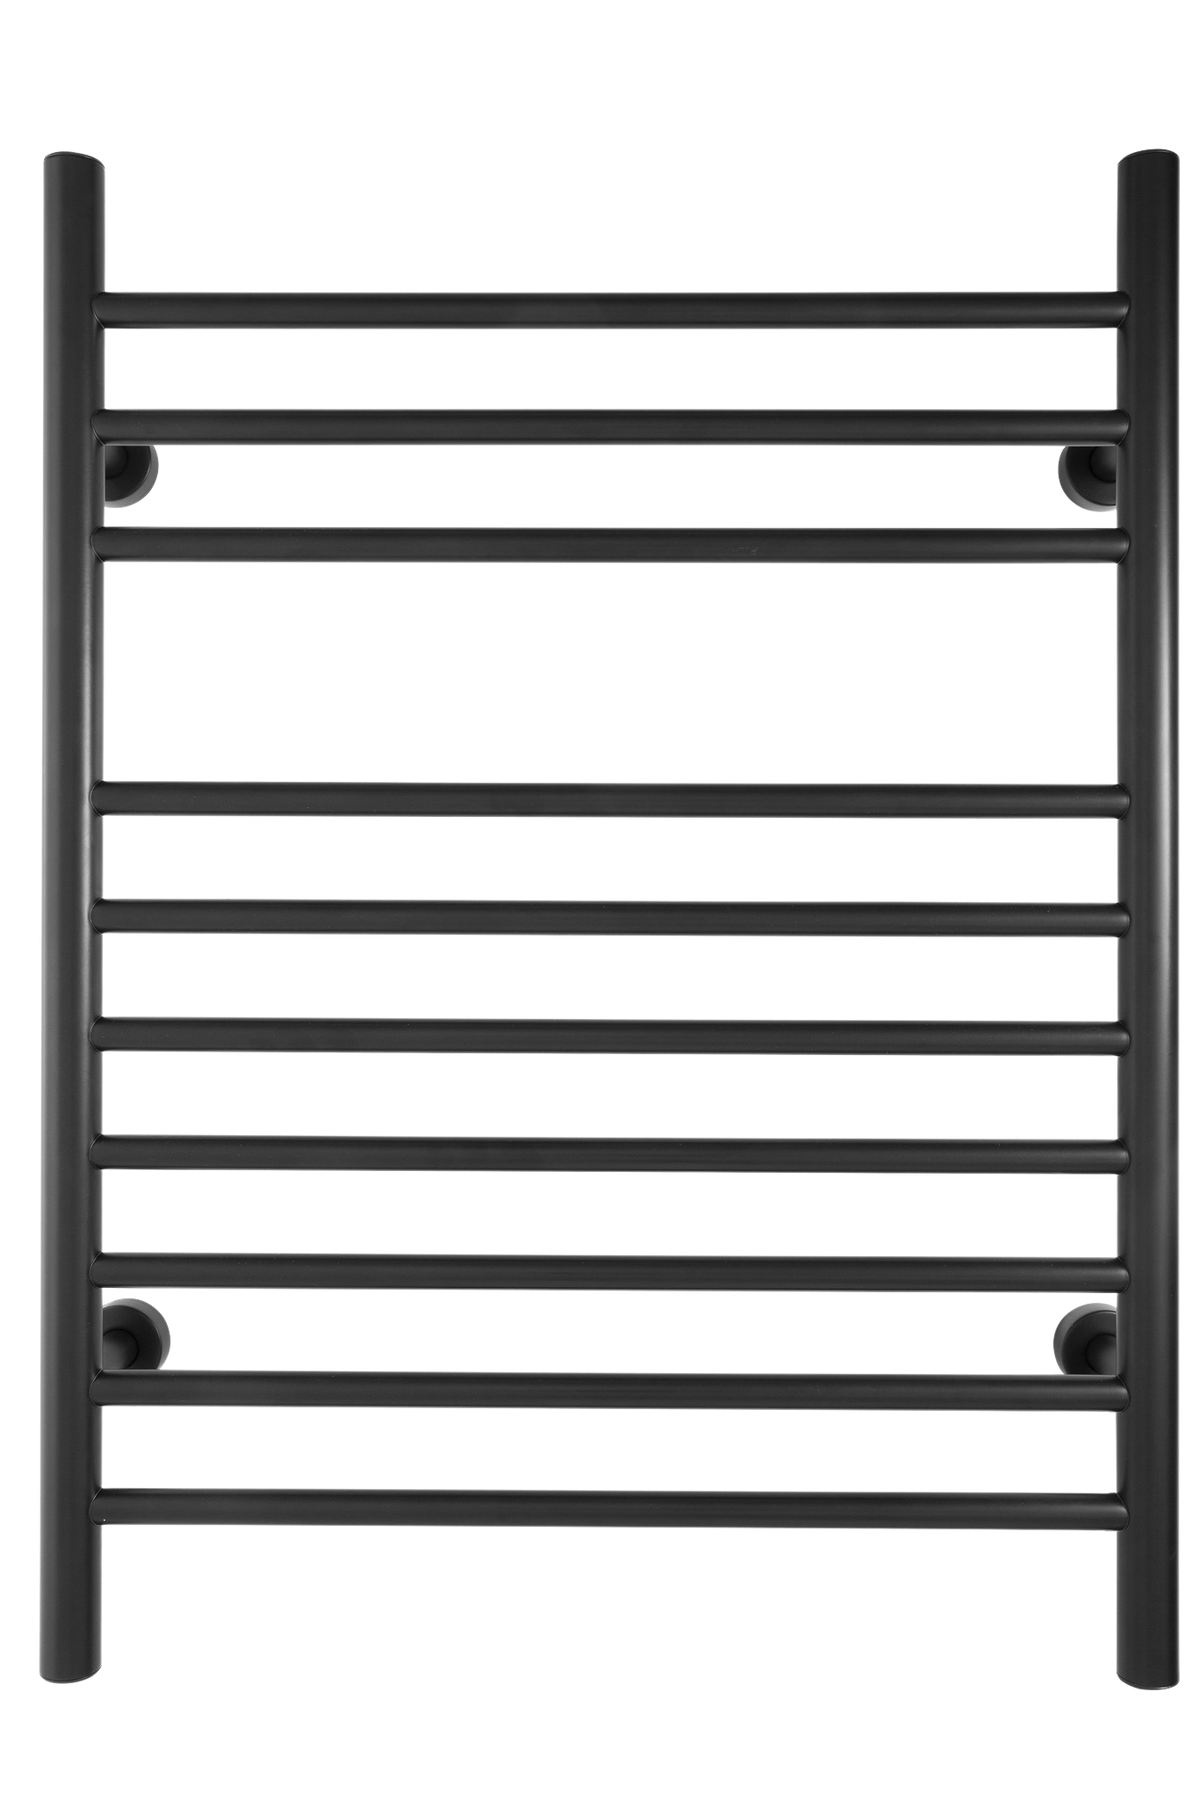 WarmlyYours TW-F10KS-HP Infinity Dual Connection 10 Bar Towel Warmer in Matte Black New